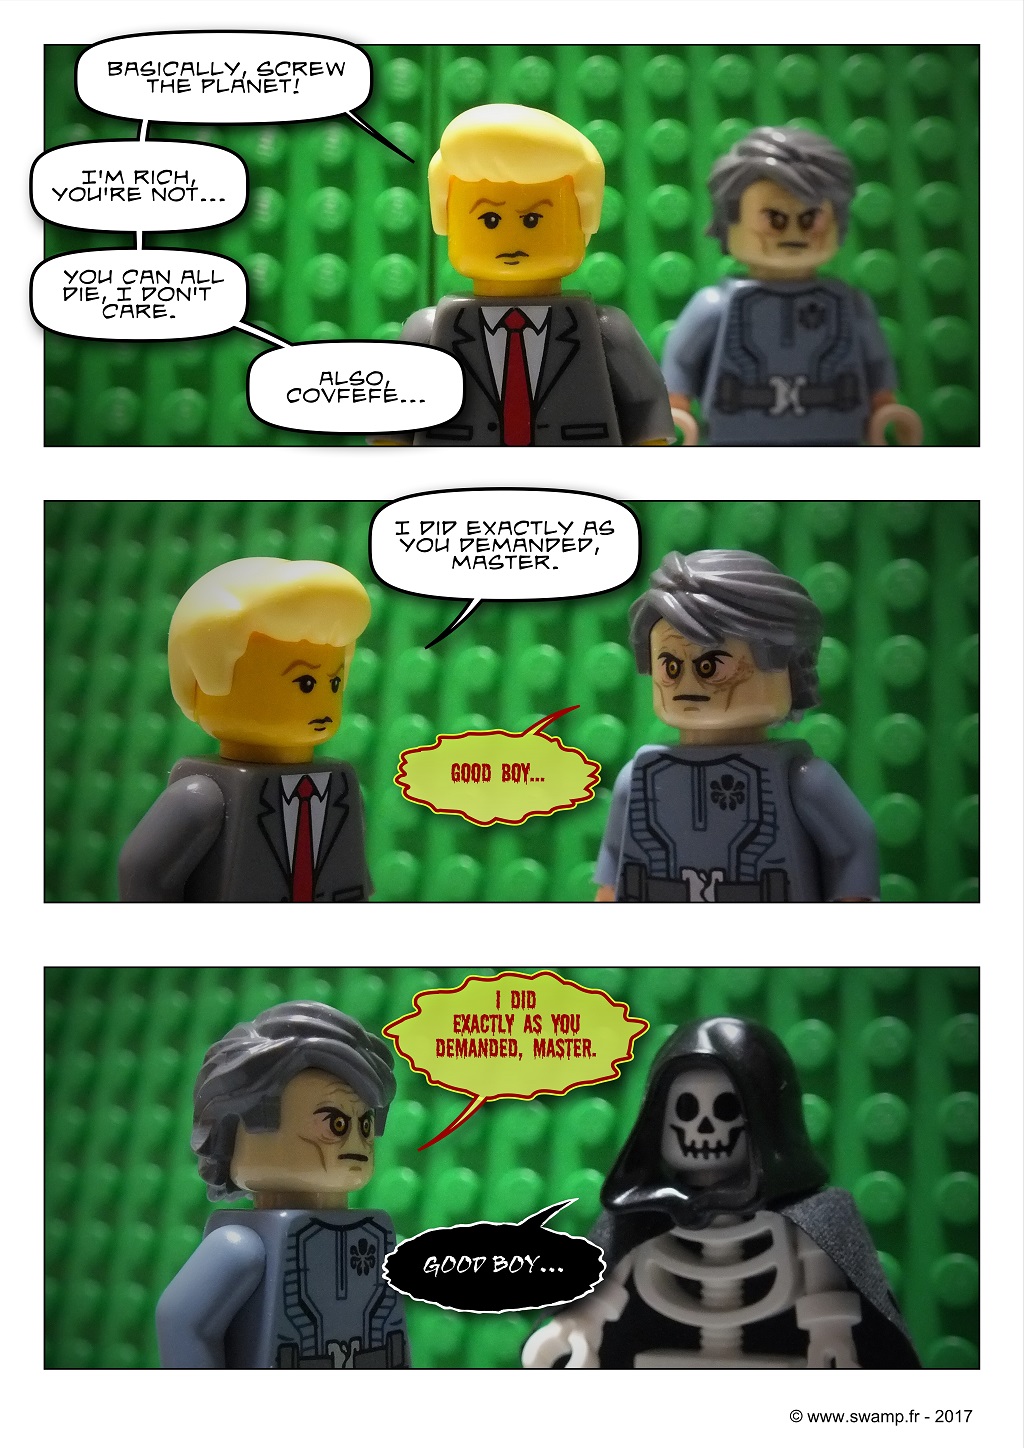 Donald Trump in Lego form, basically tells the world to go screw itself. Then, he reports to his true master, Steve Bannon, who in turn, reports to his true master, Death.